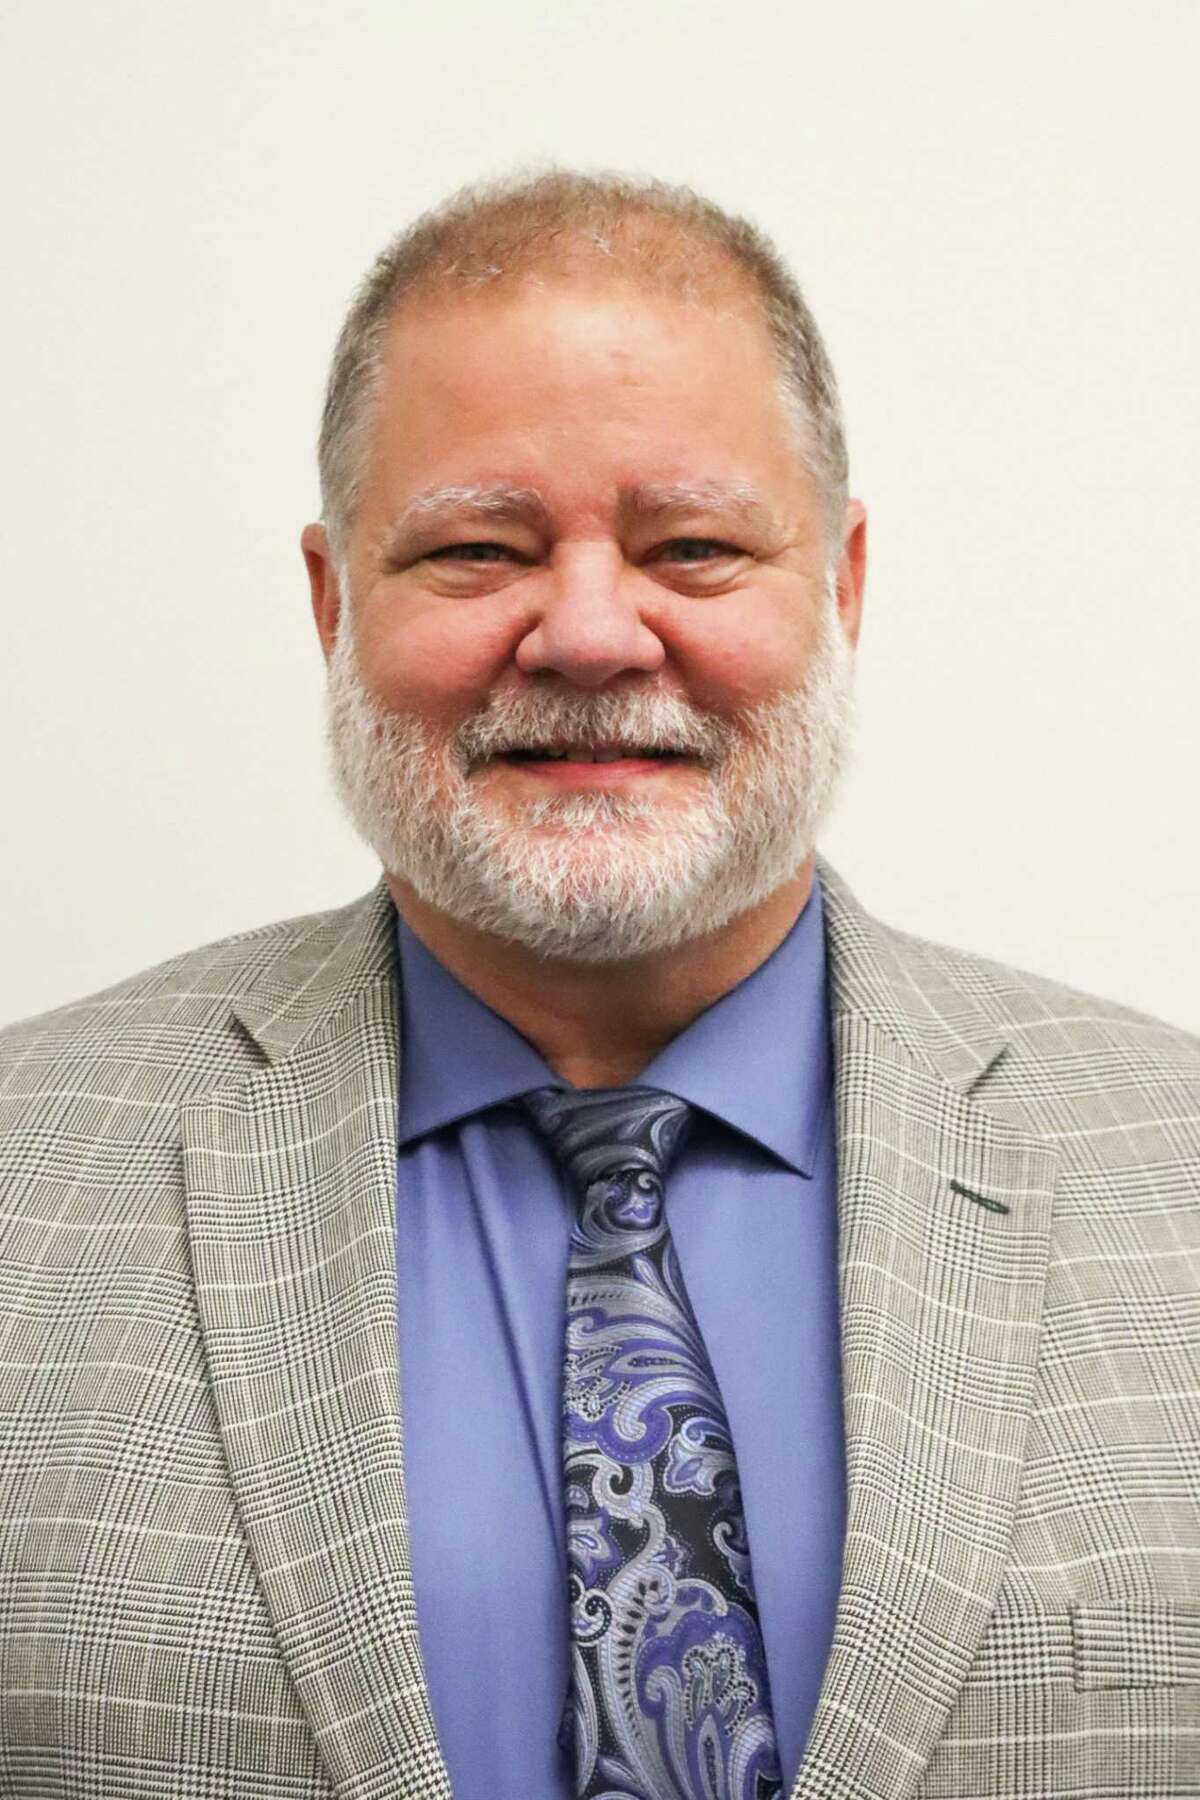 Pearland Independent School District has named Mike Akin director of career and technical education.